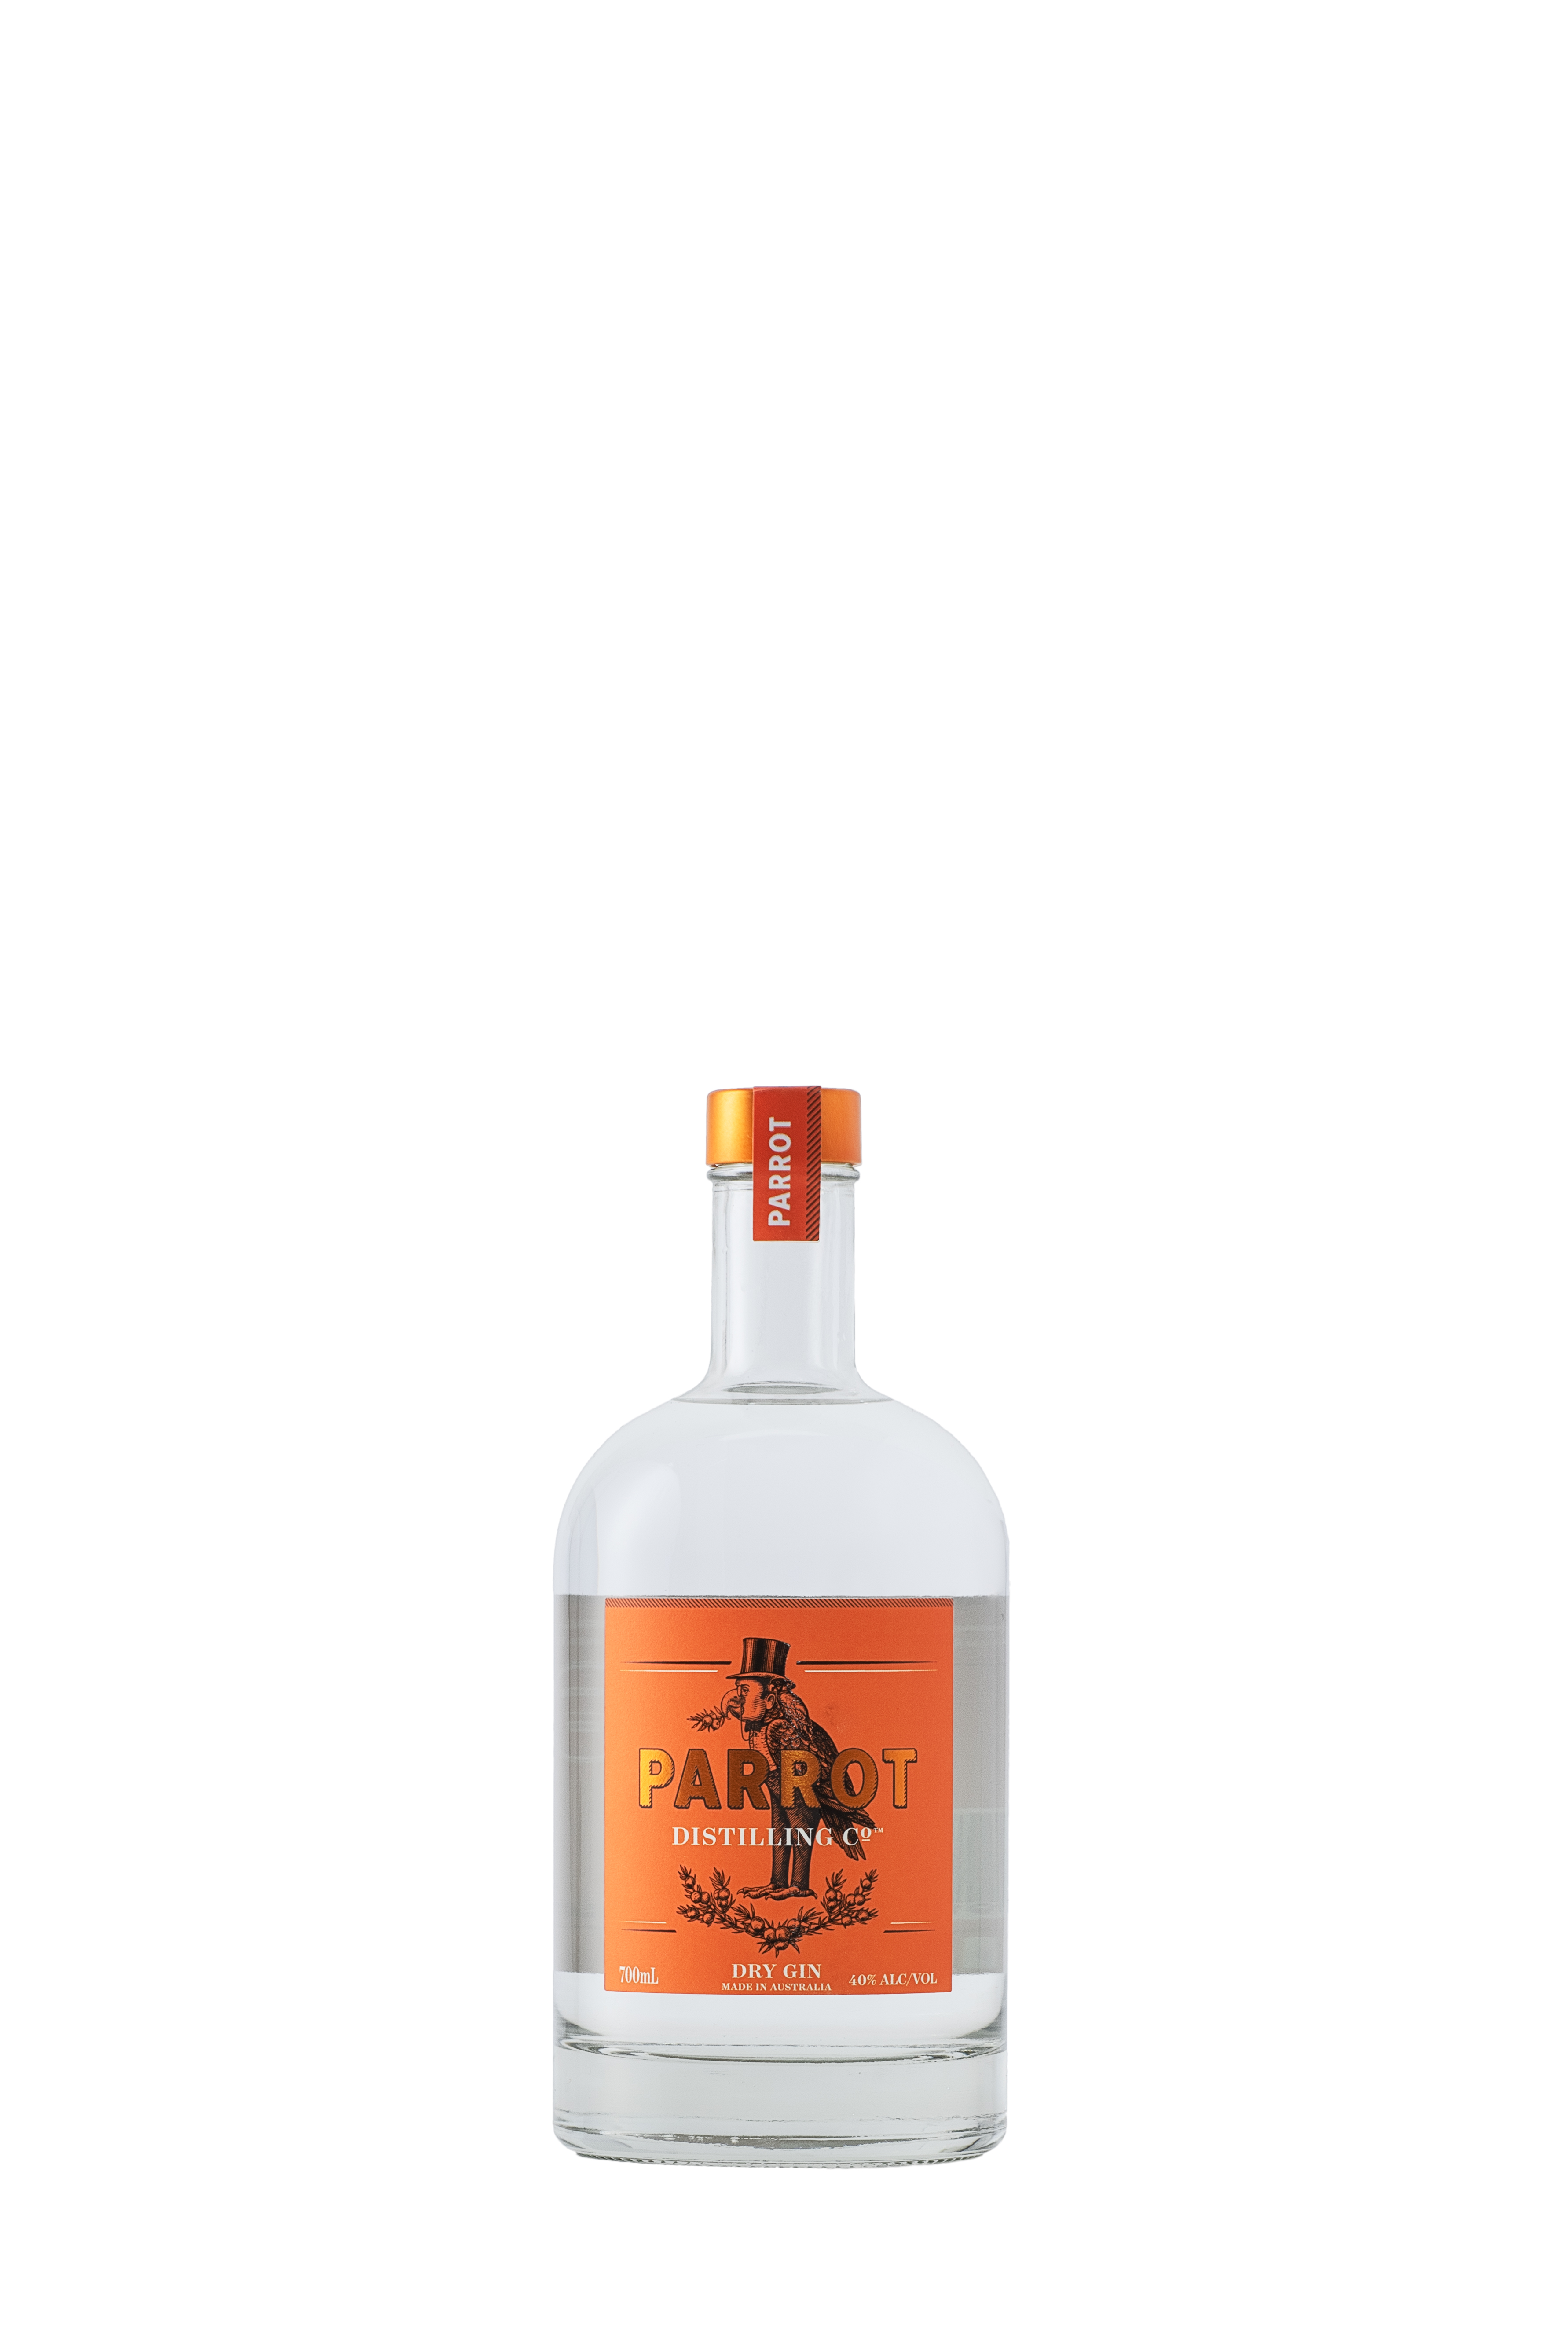 High key commercial product photo of bottle for Orange NSW company Parrot Distilling by Central West Photographer Brent Young